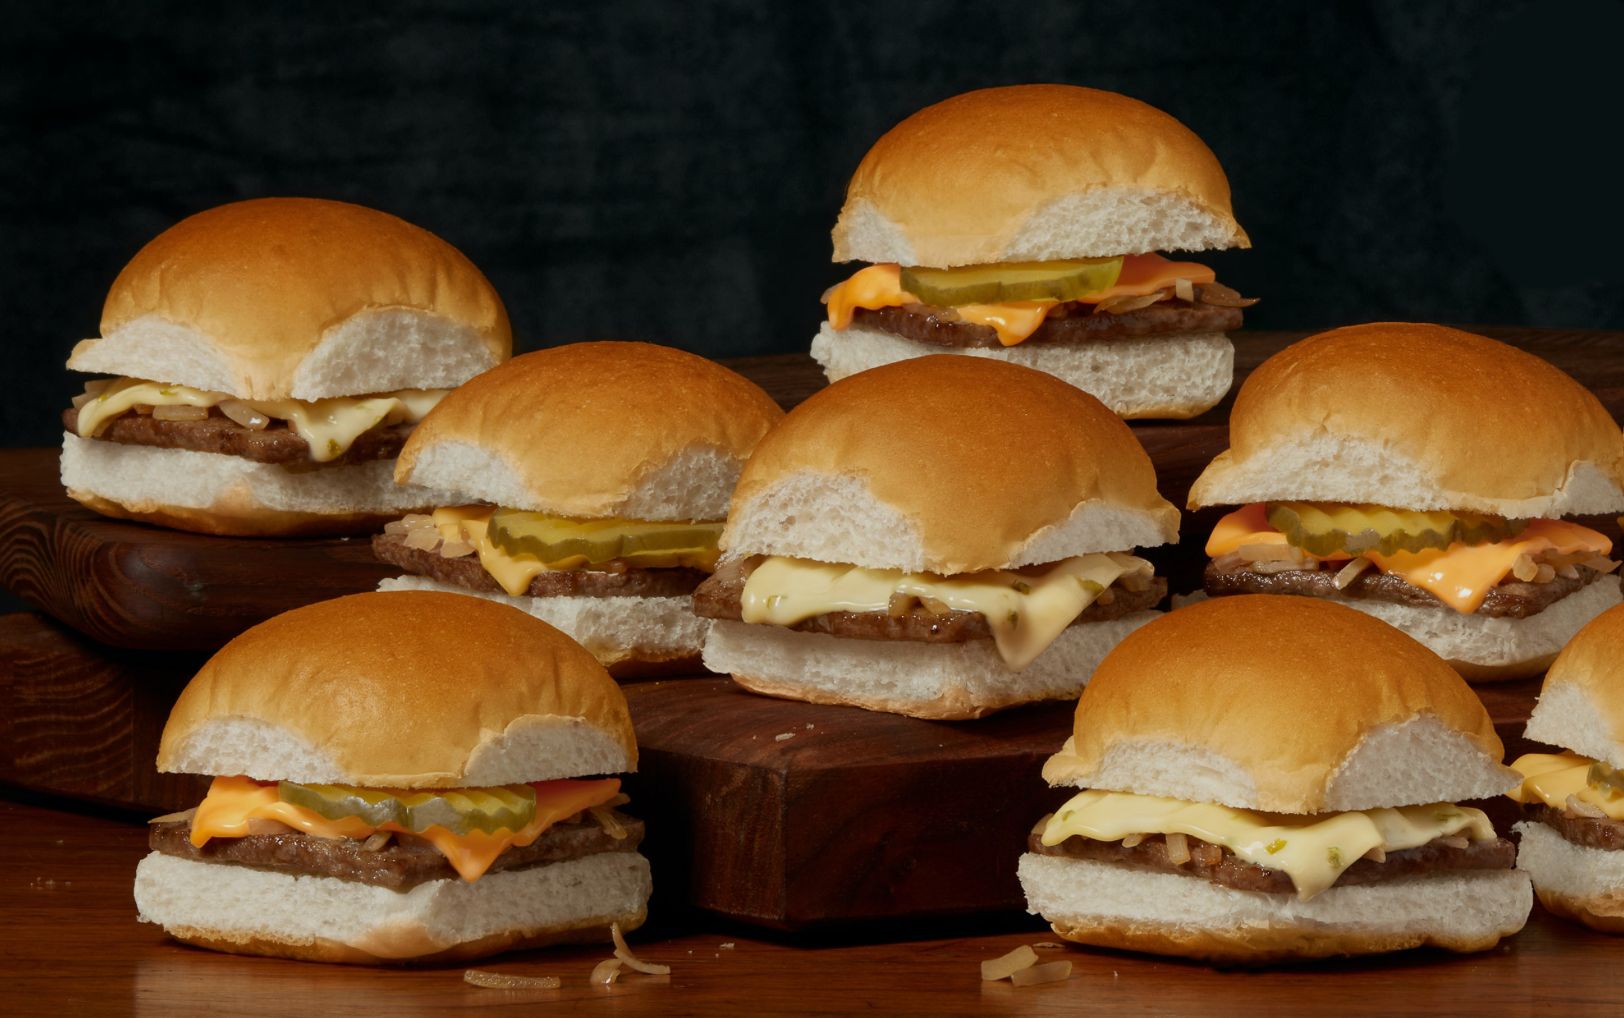 Enjoy an $8.99 Cheesy 10 Sack of Cheese Sliders at White Castle 